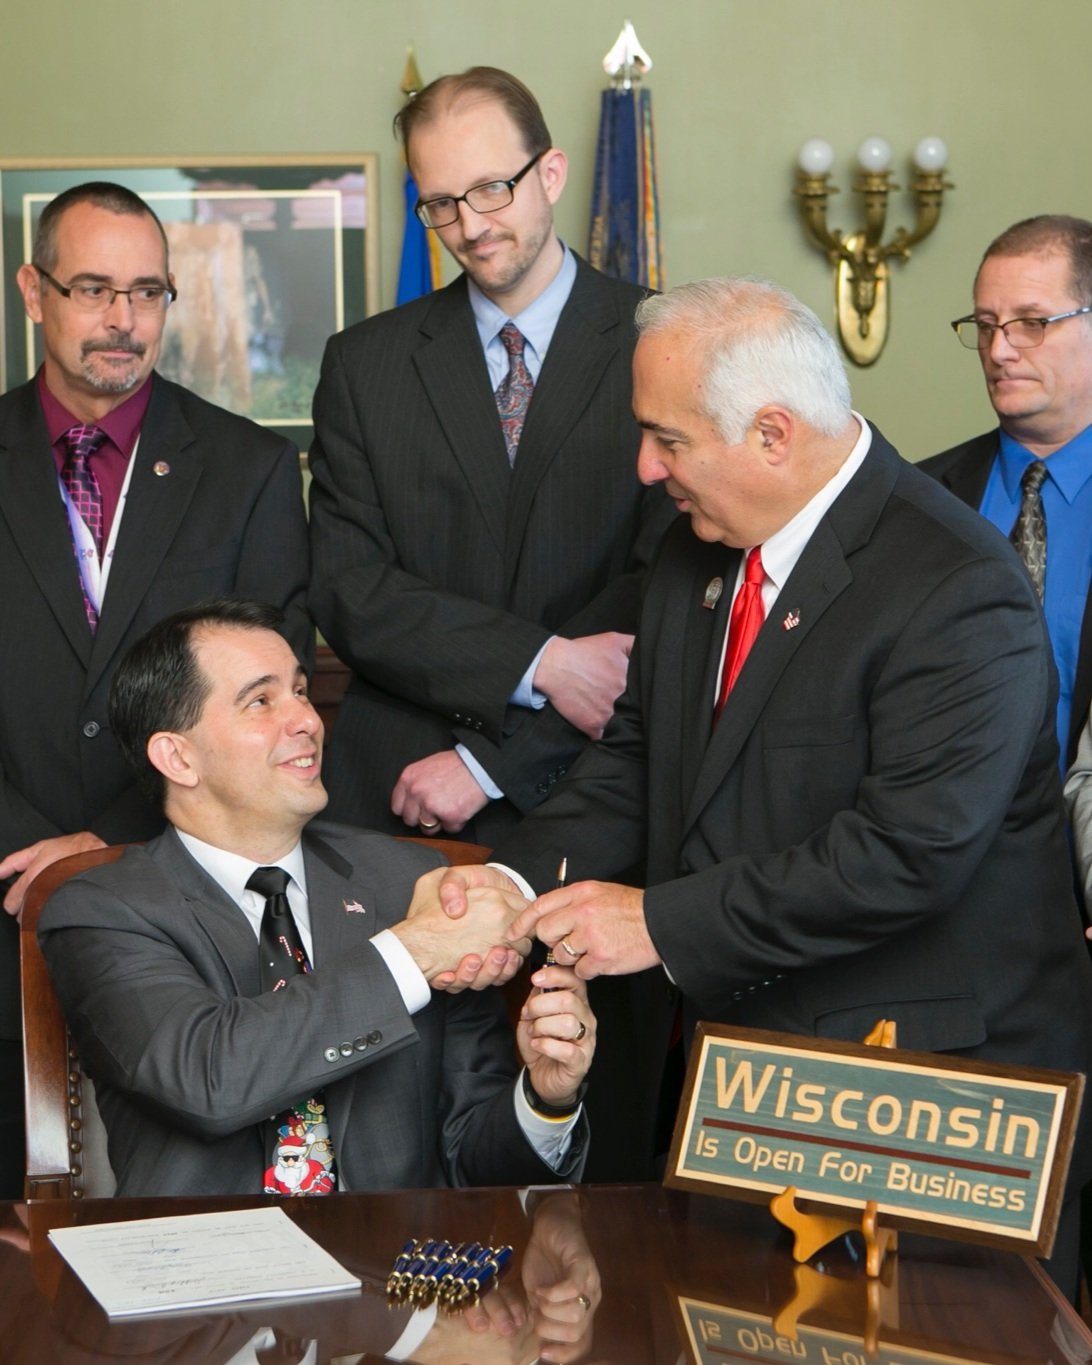 John getting his bill signed by the Governor